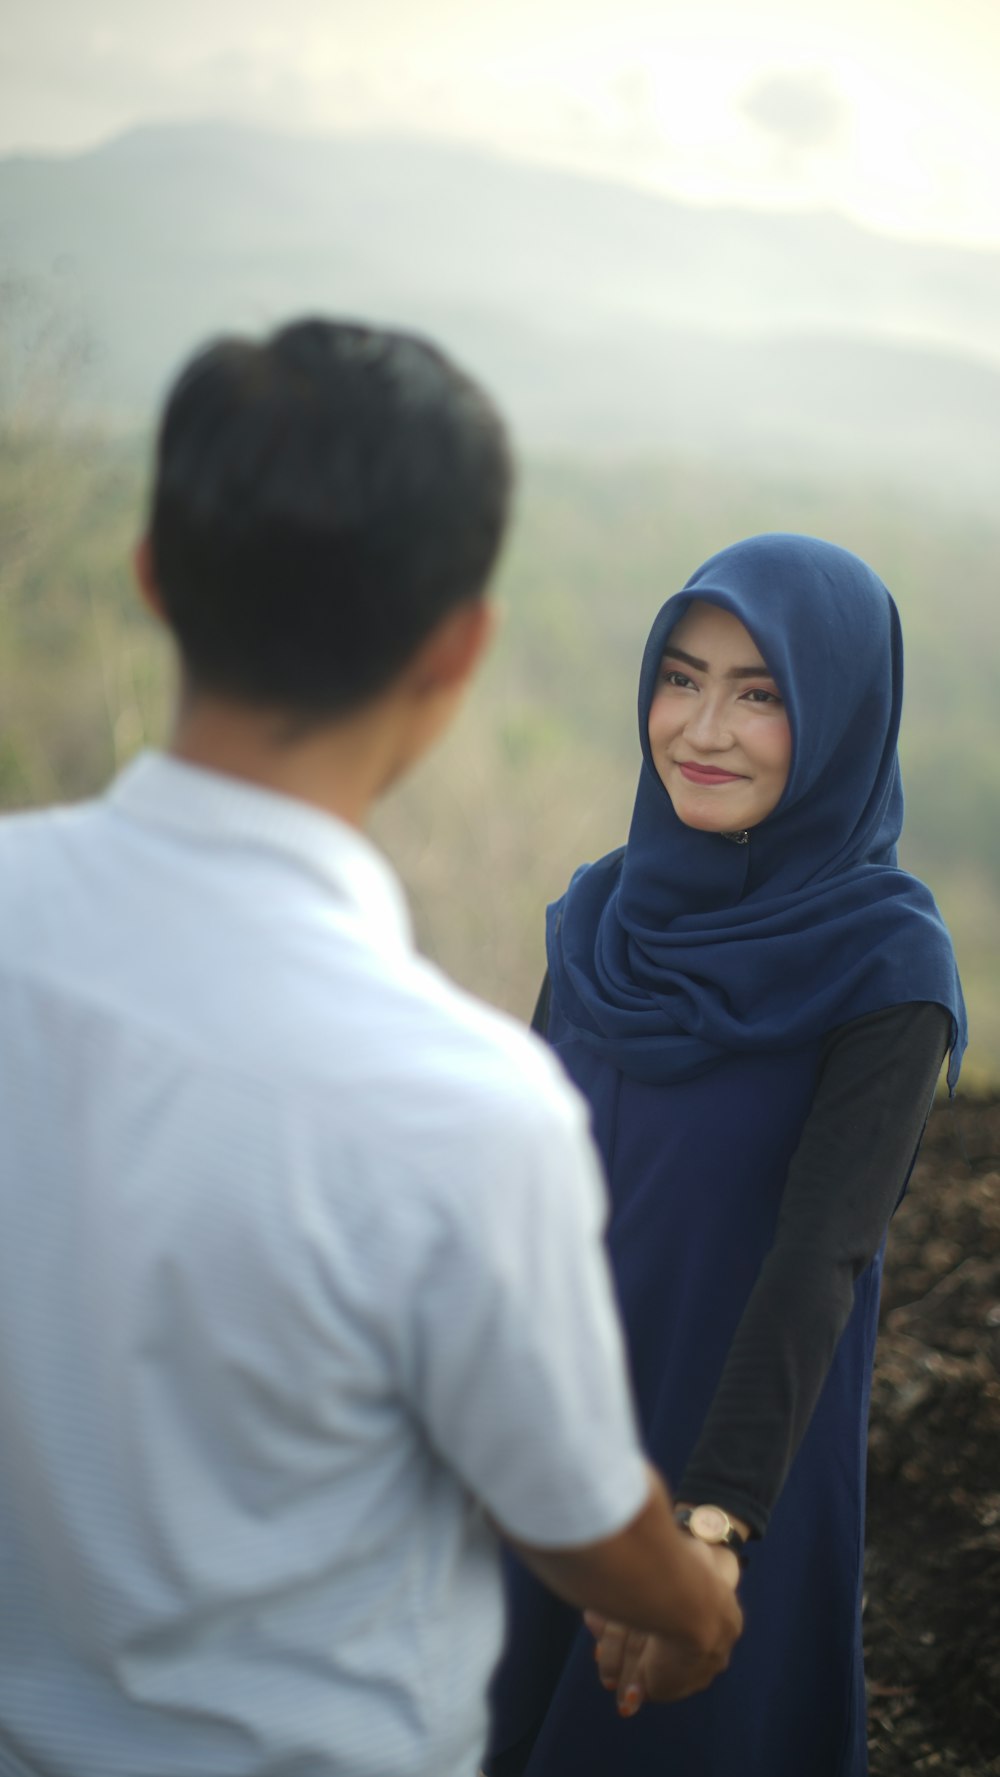 woman wearing hijab smiling in front of man